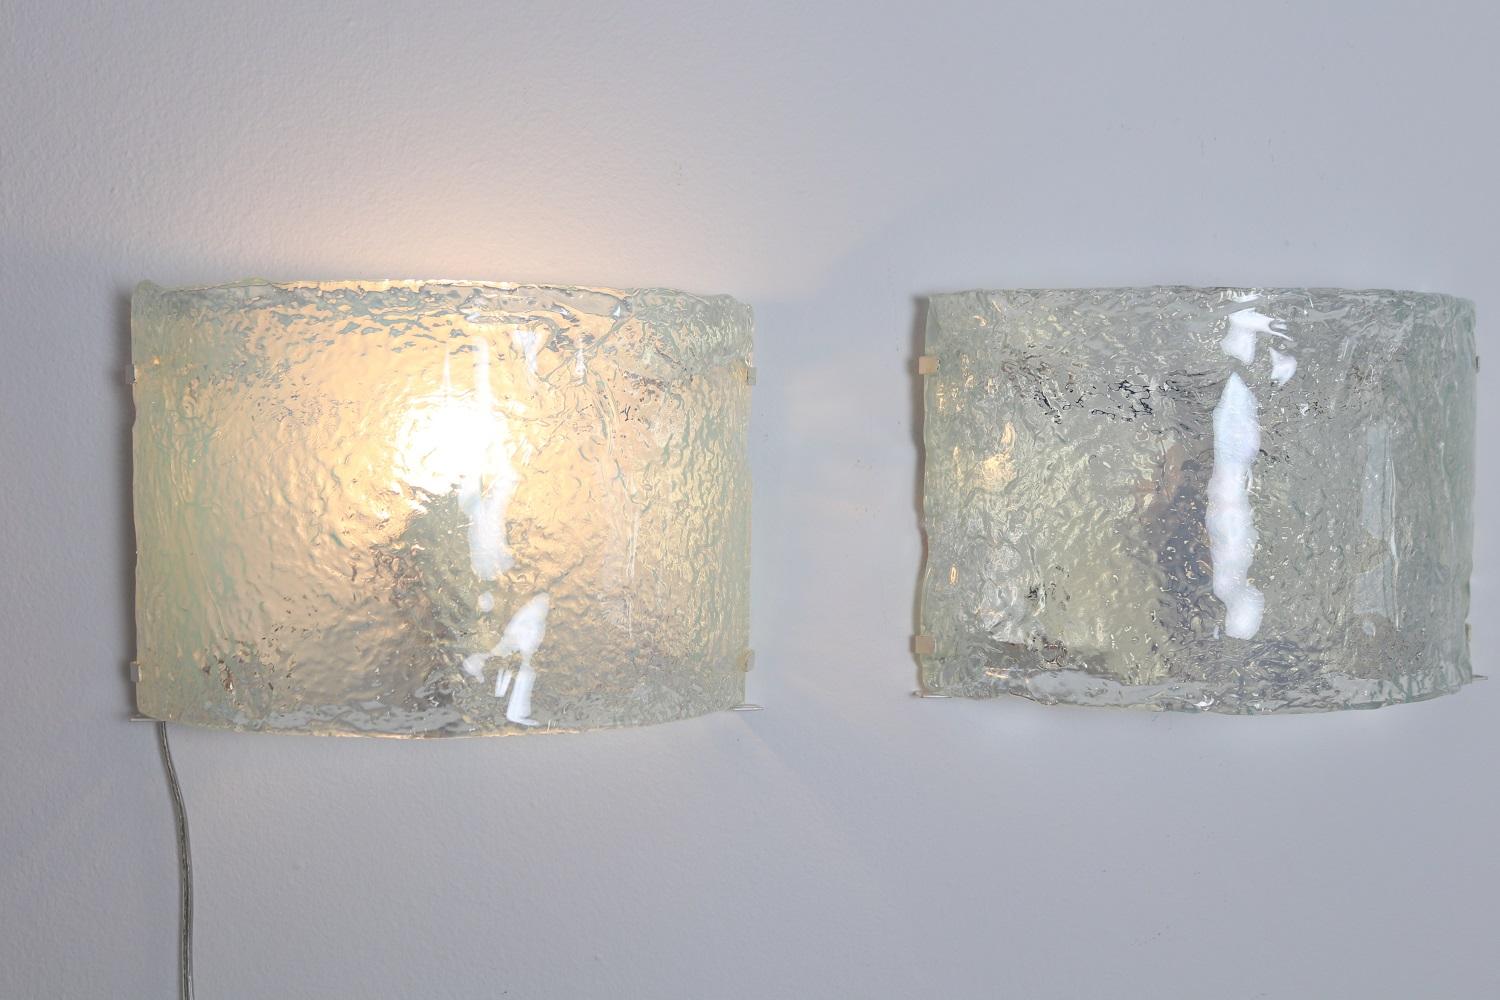 Italian Midcentury Wall Sconces in Opaline Murano Glass by Carlo Nason, 1970s For Sale 2